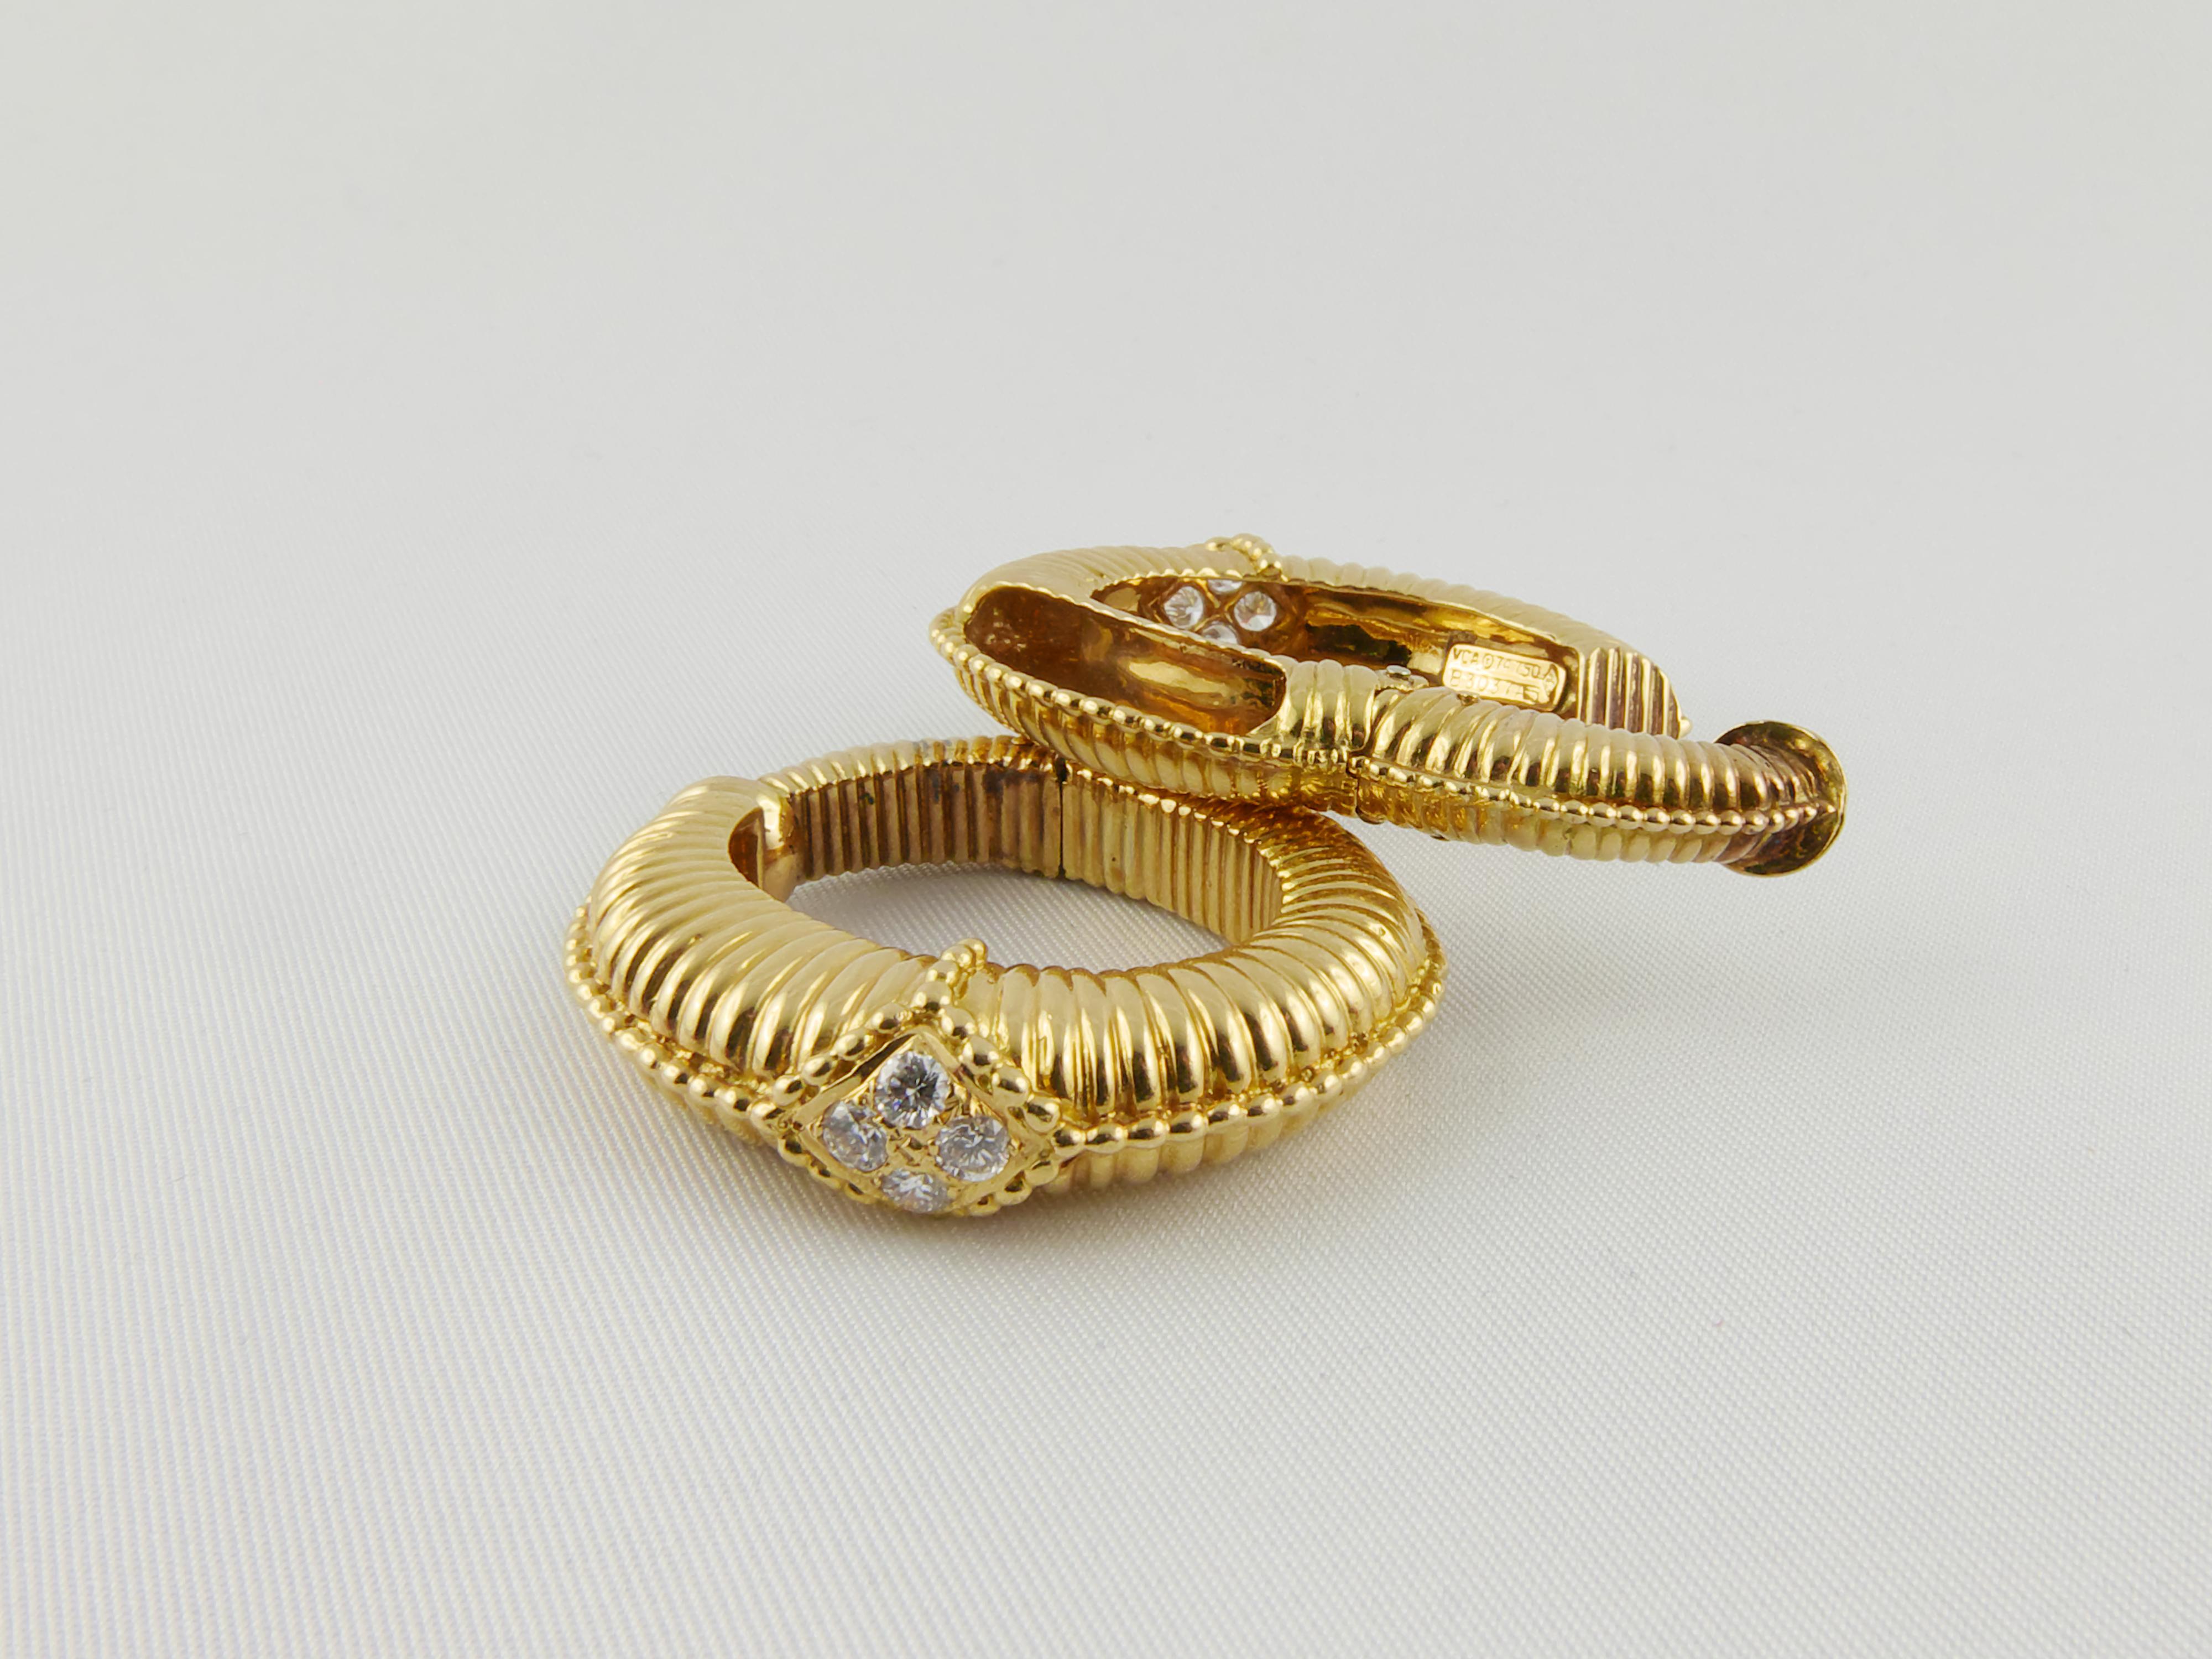 1970s Van Cleef & Arpels Yellow Gold and Diamonds Bracelet and Earrings Set 2